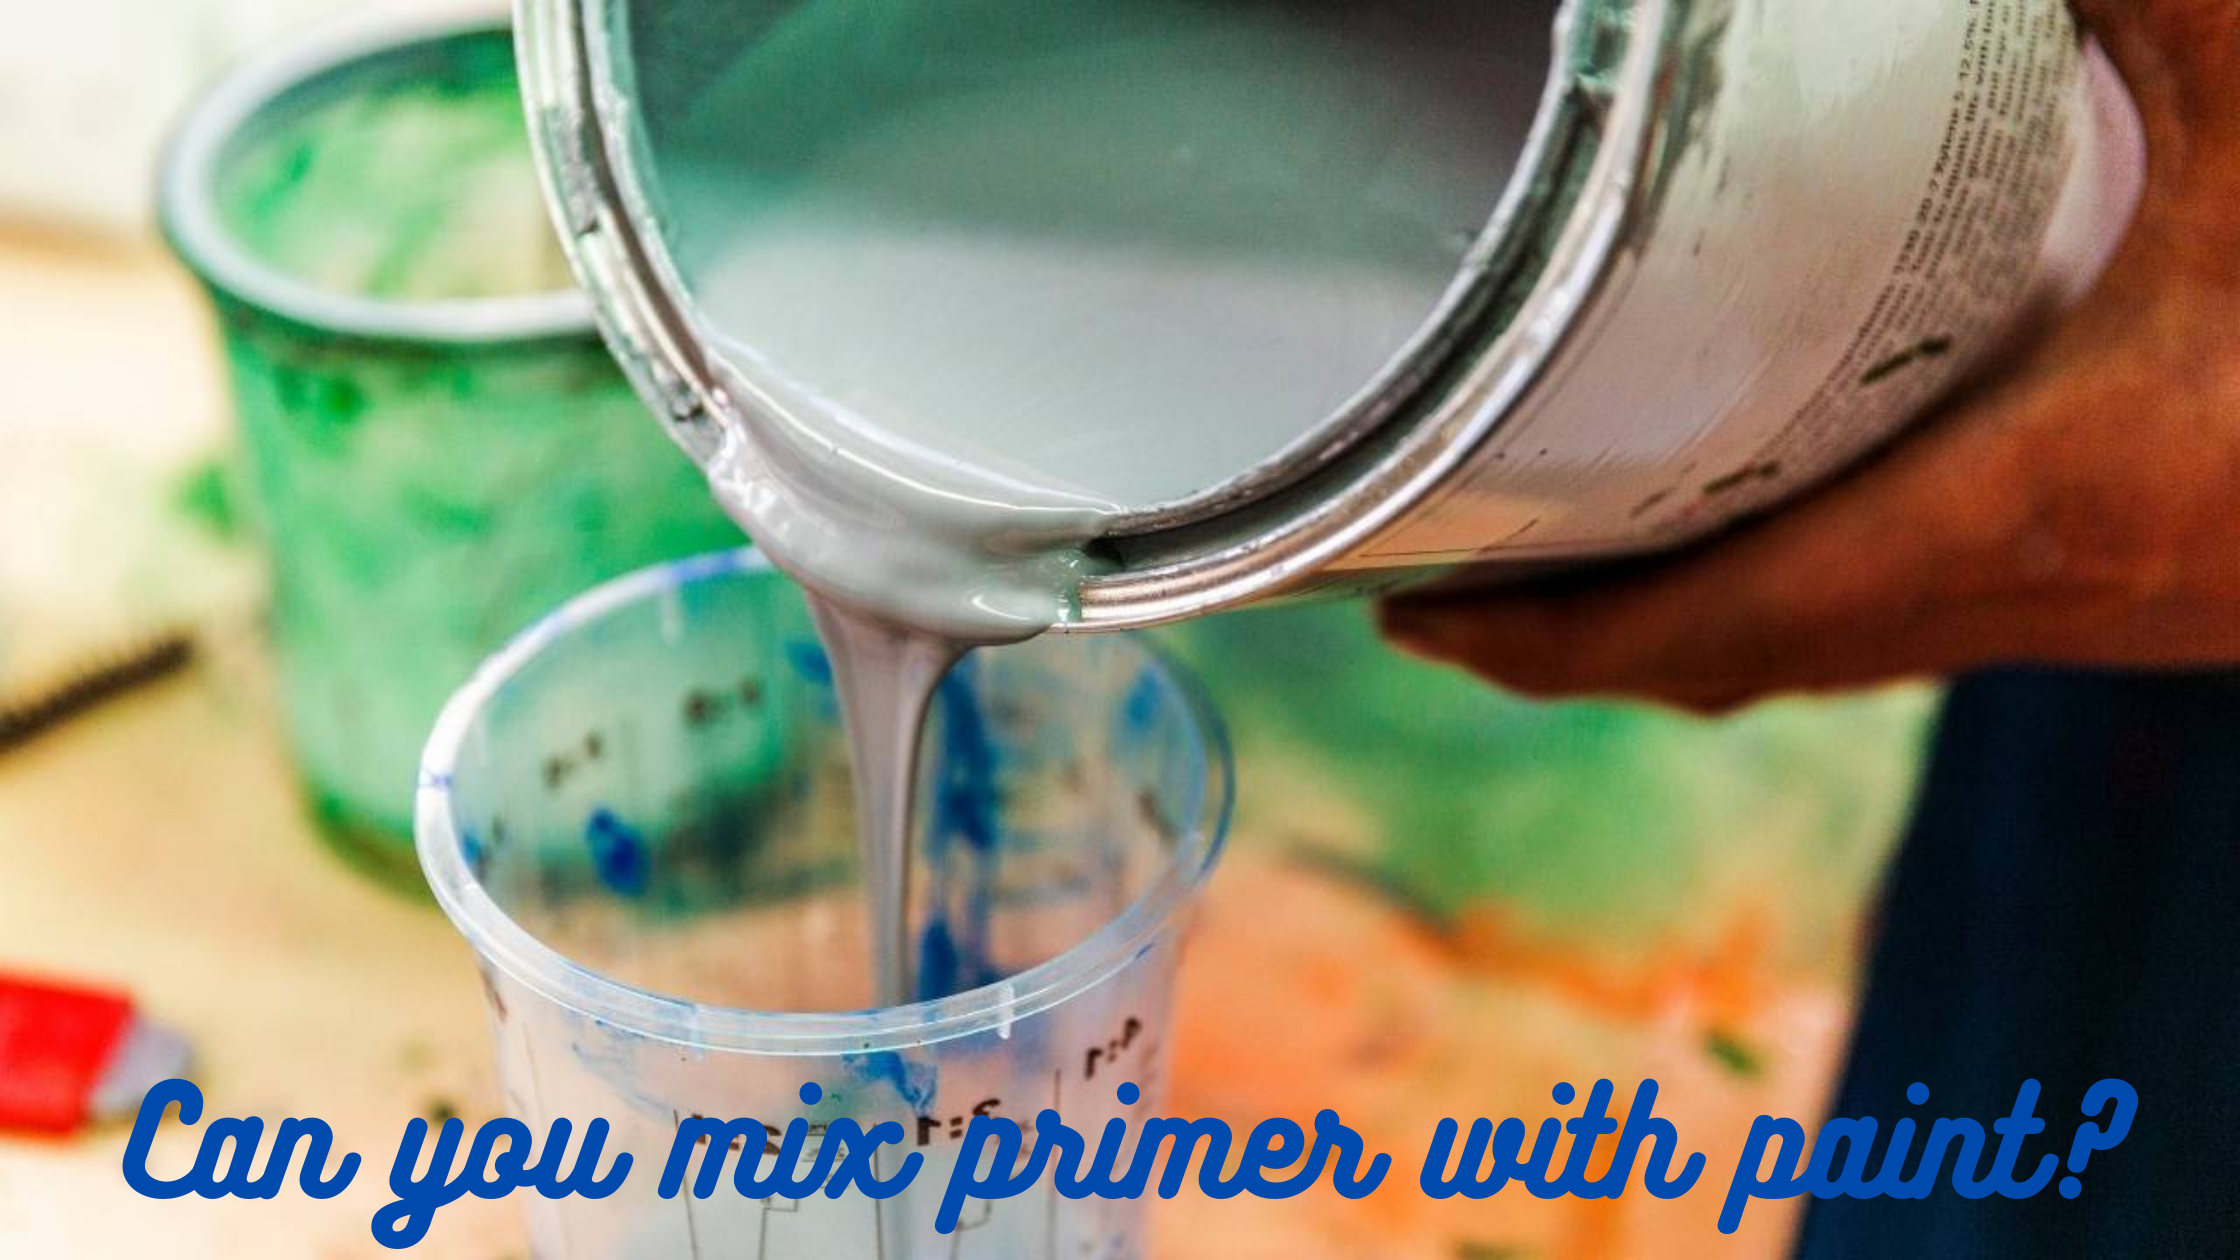 Can you mix primer with paint